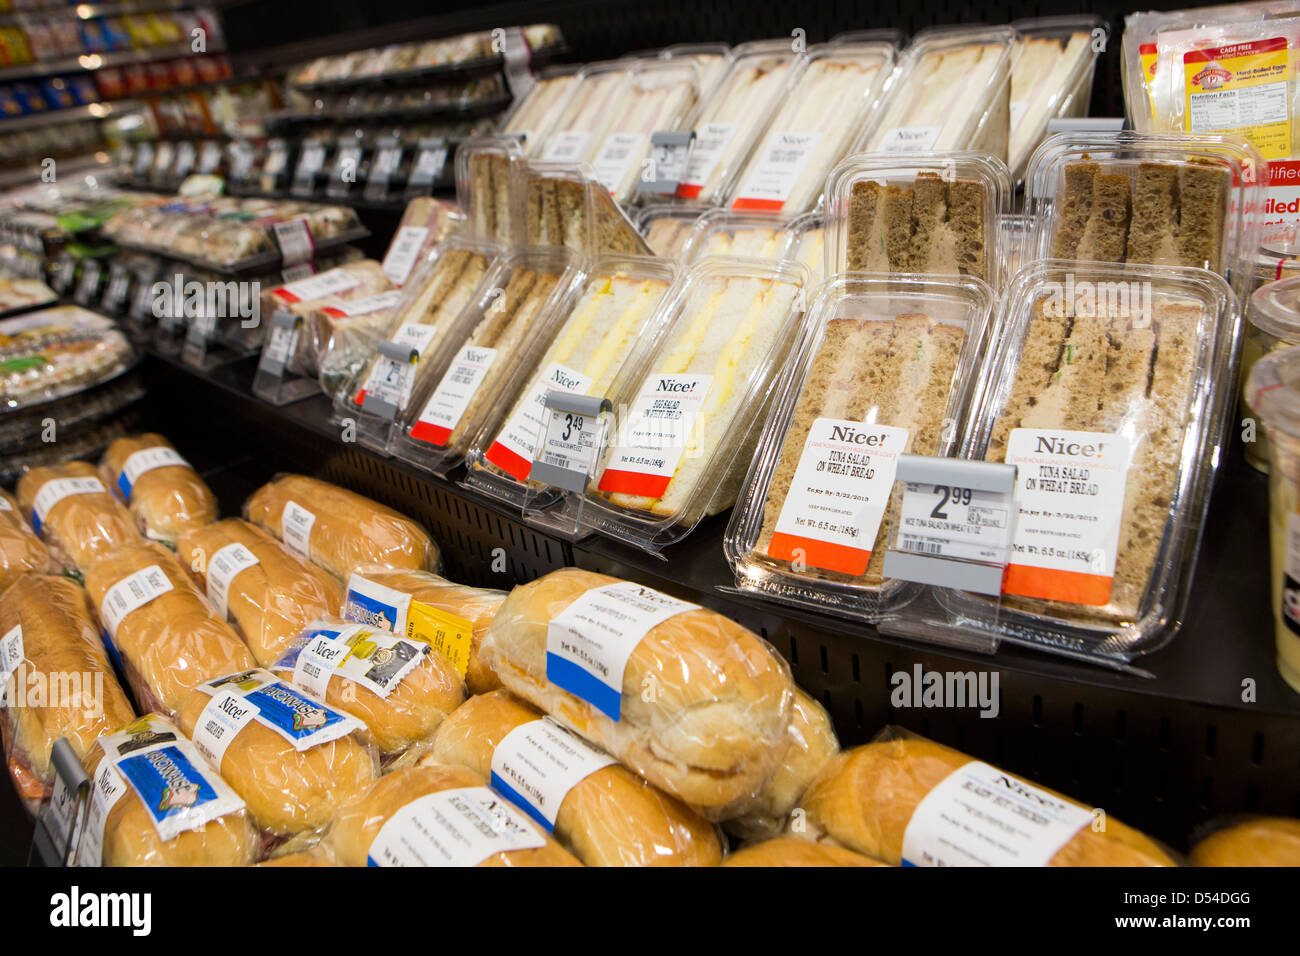 Pre-made sandwiches on display at a Walgreens Flagship store. Stock Photo